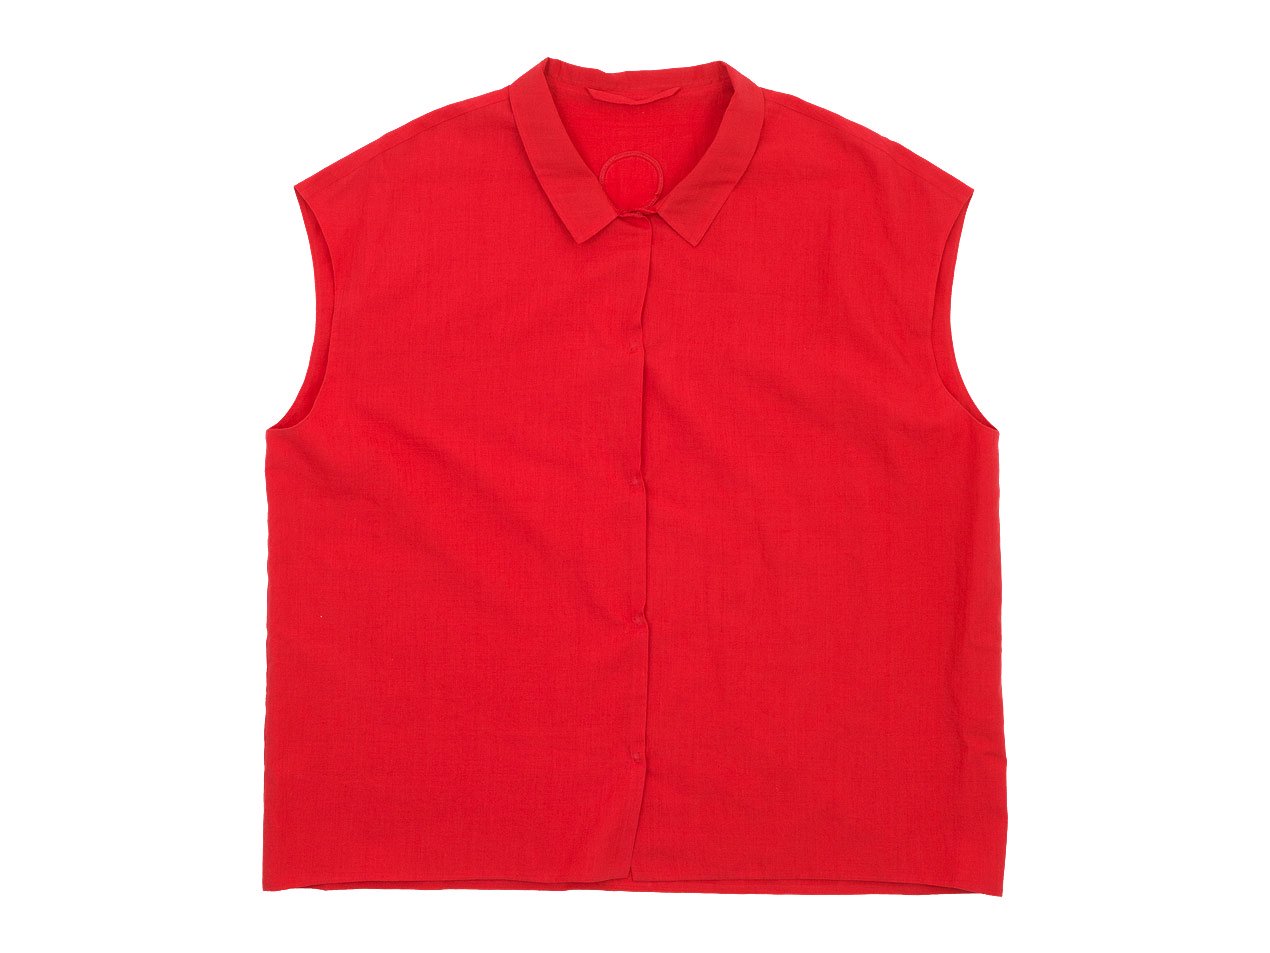 Atelier d'antan Stuck（シュトゥック） No Sleeve Shirts RED